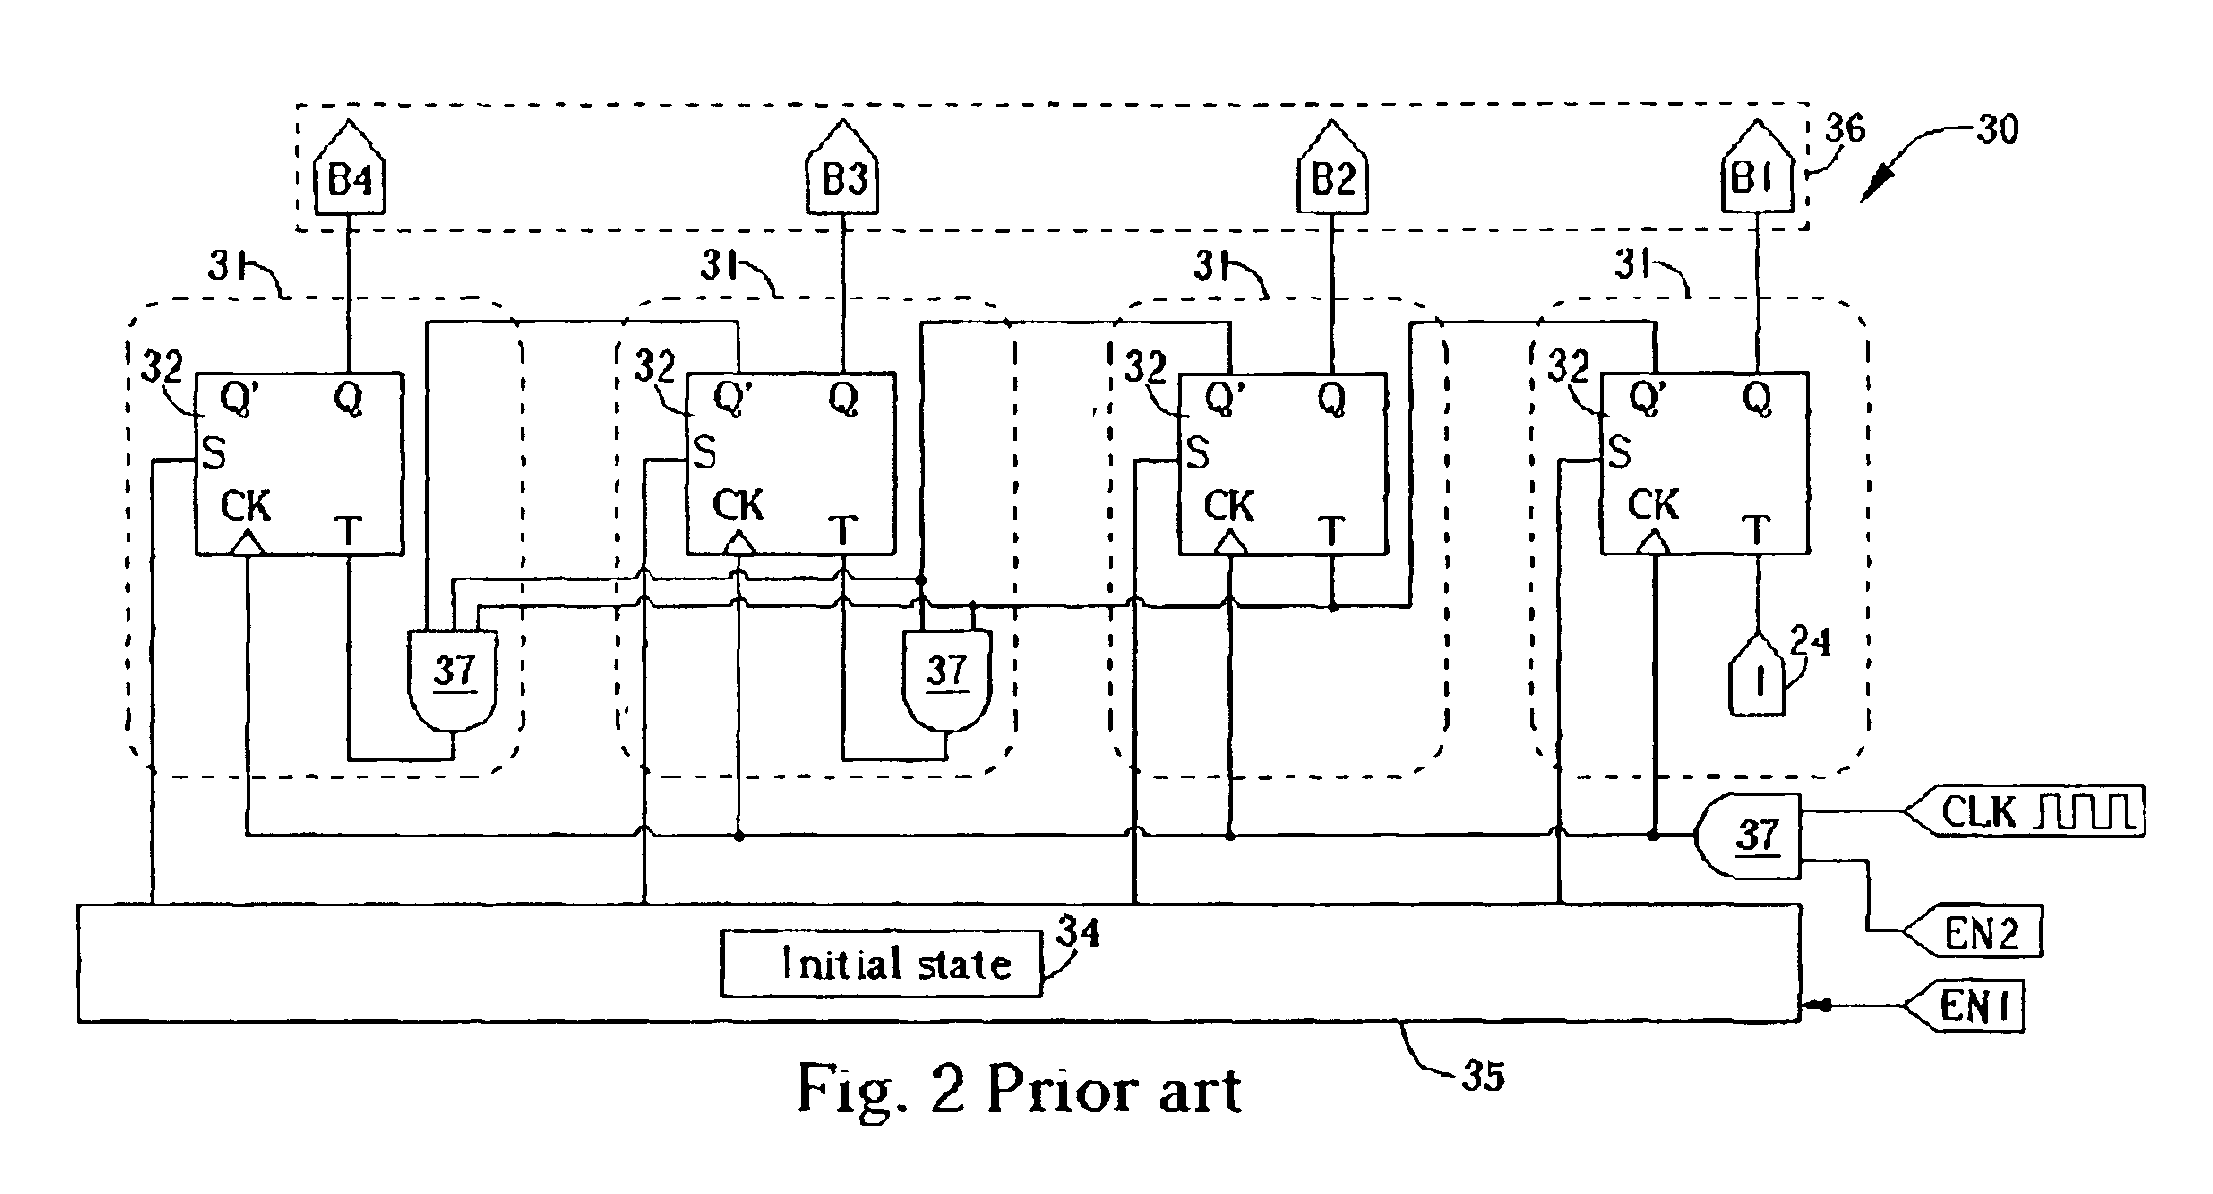 State machine, counter and related method for gating redundant triggering clocks according to initial state